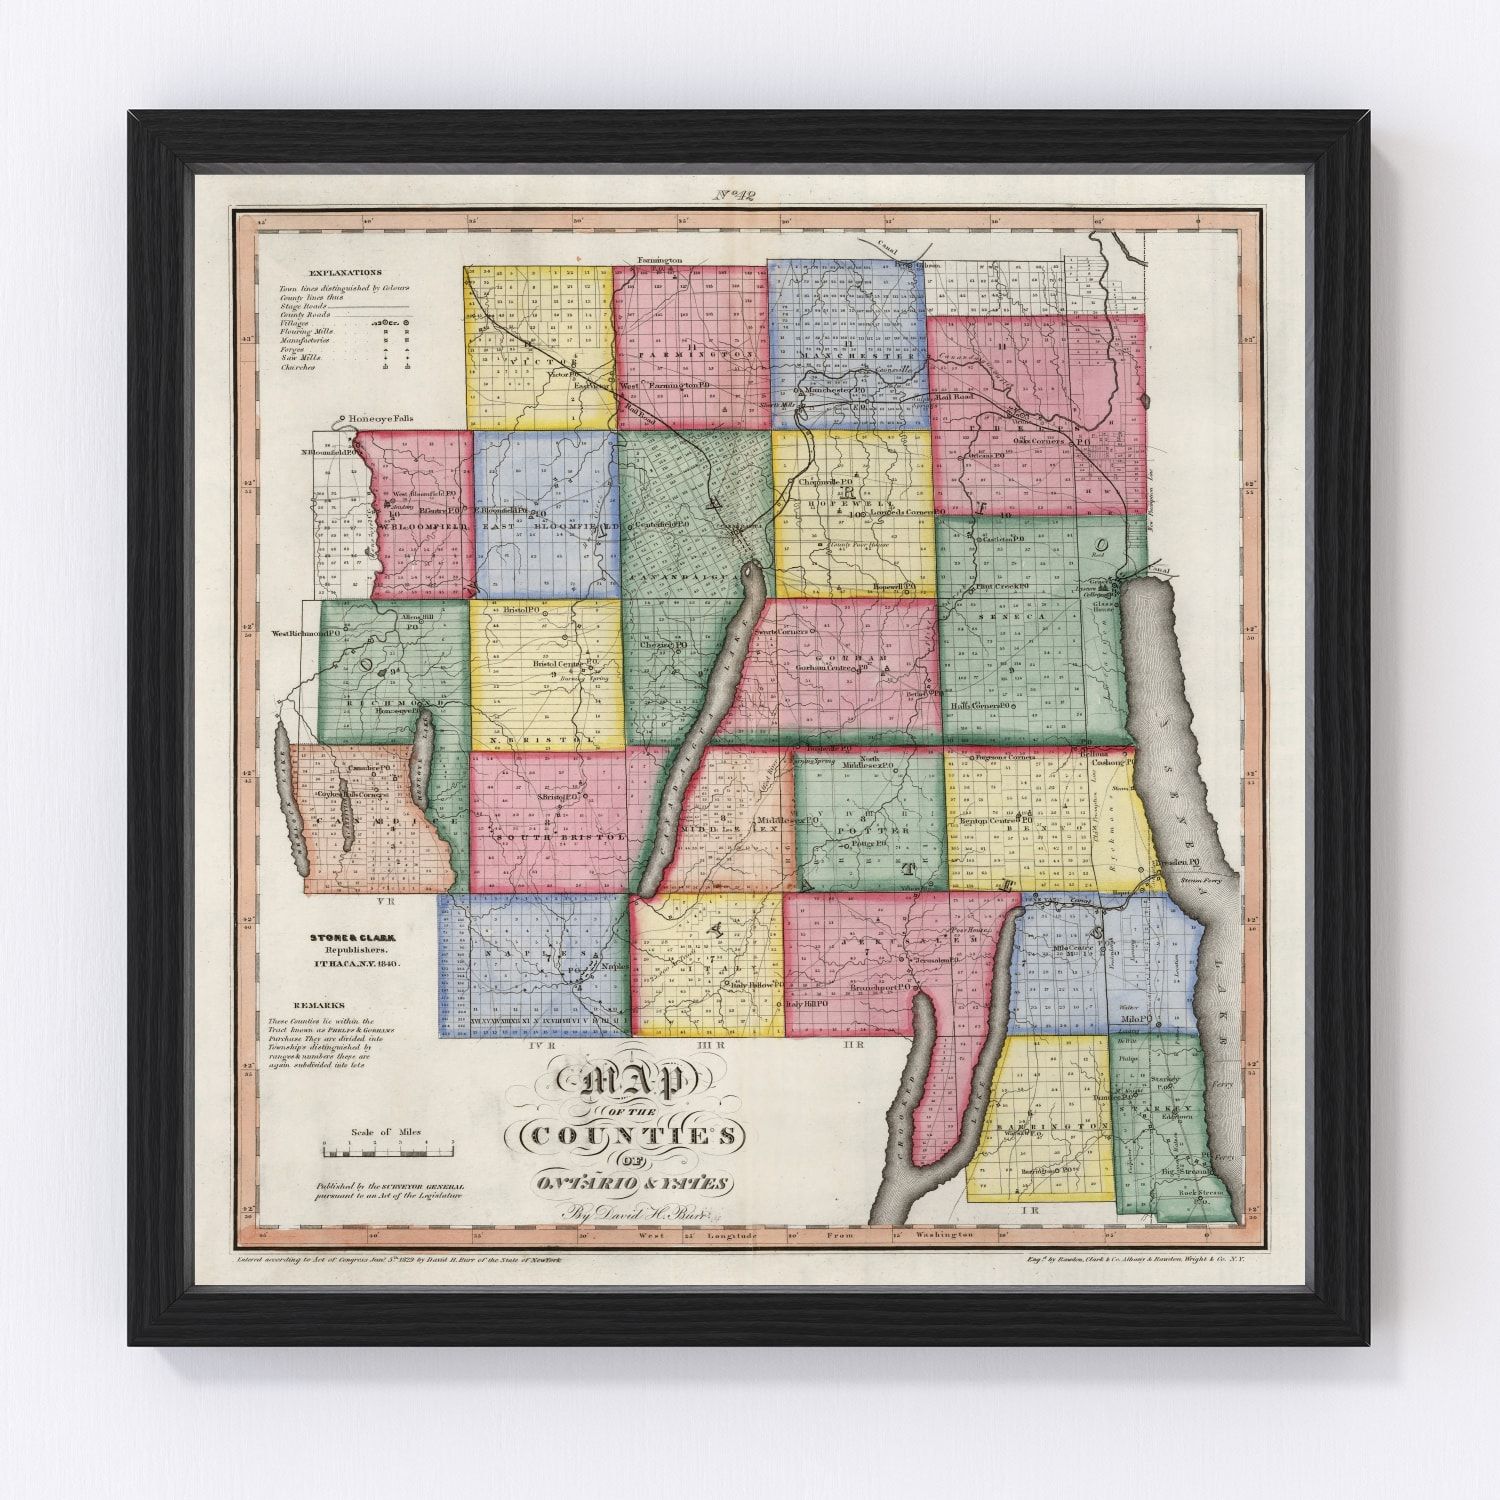 Vintage Map Of Ontario County New York 1840 By Teds Vintage Art 6722